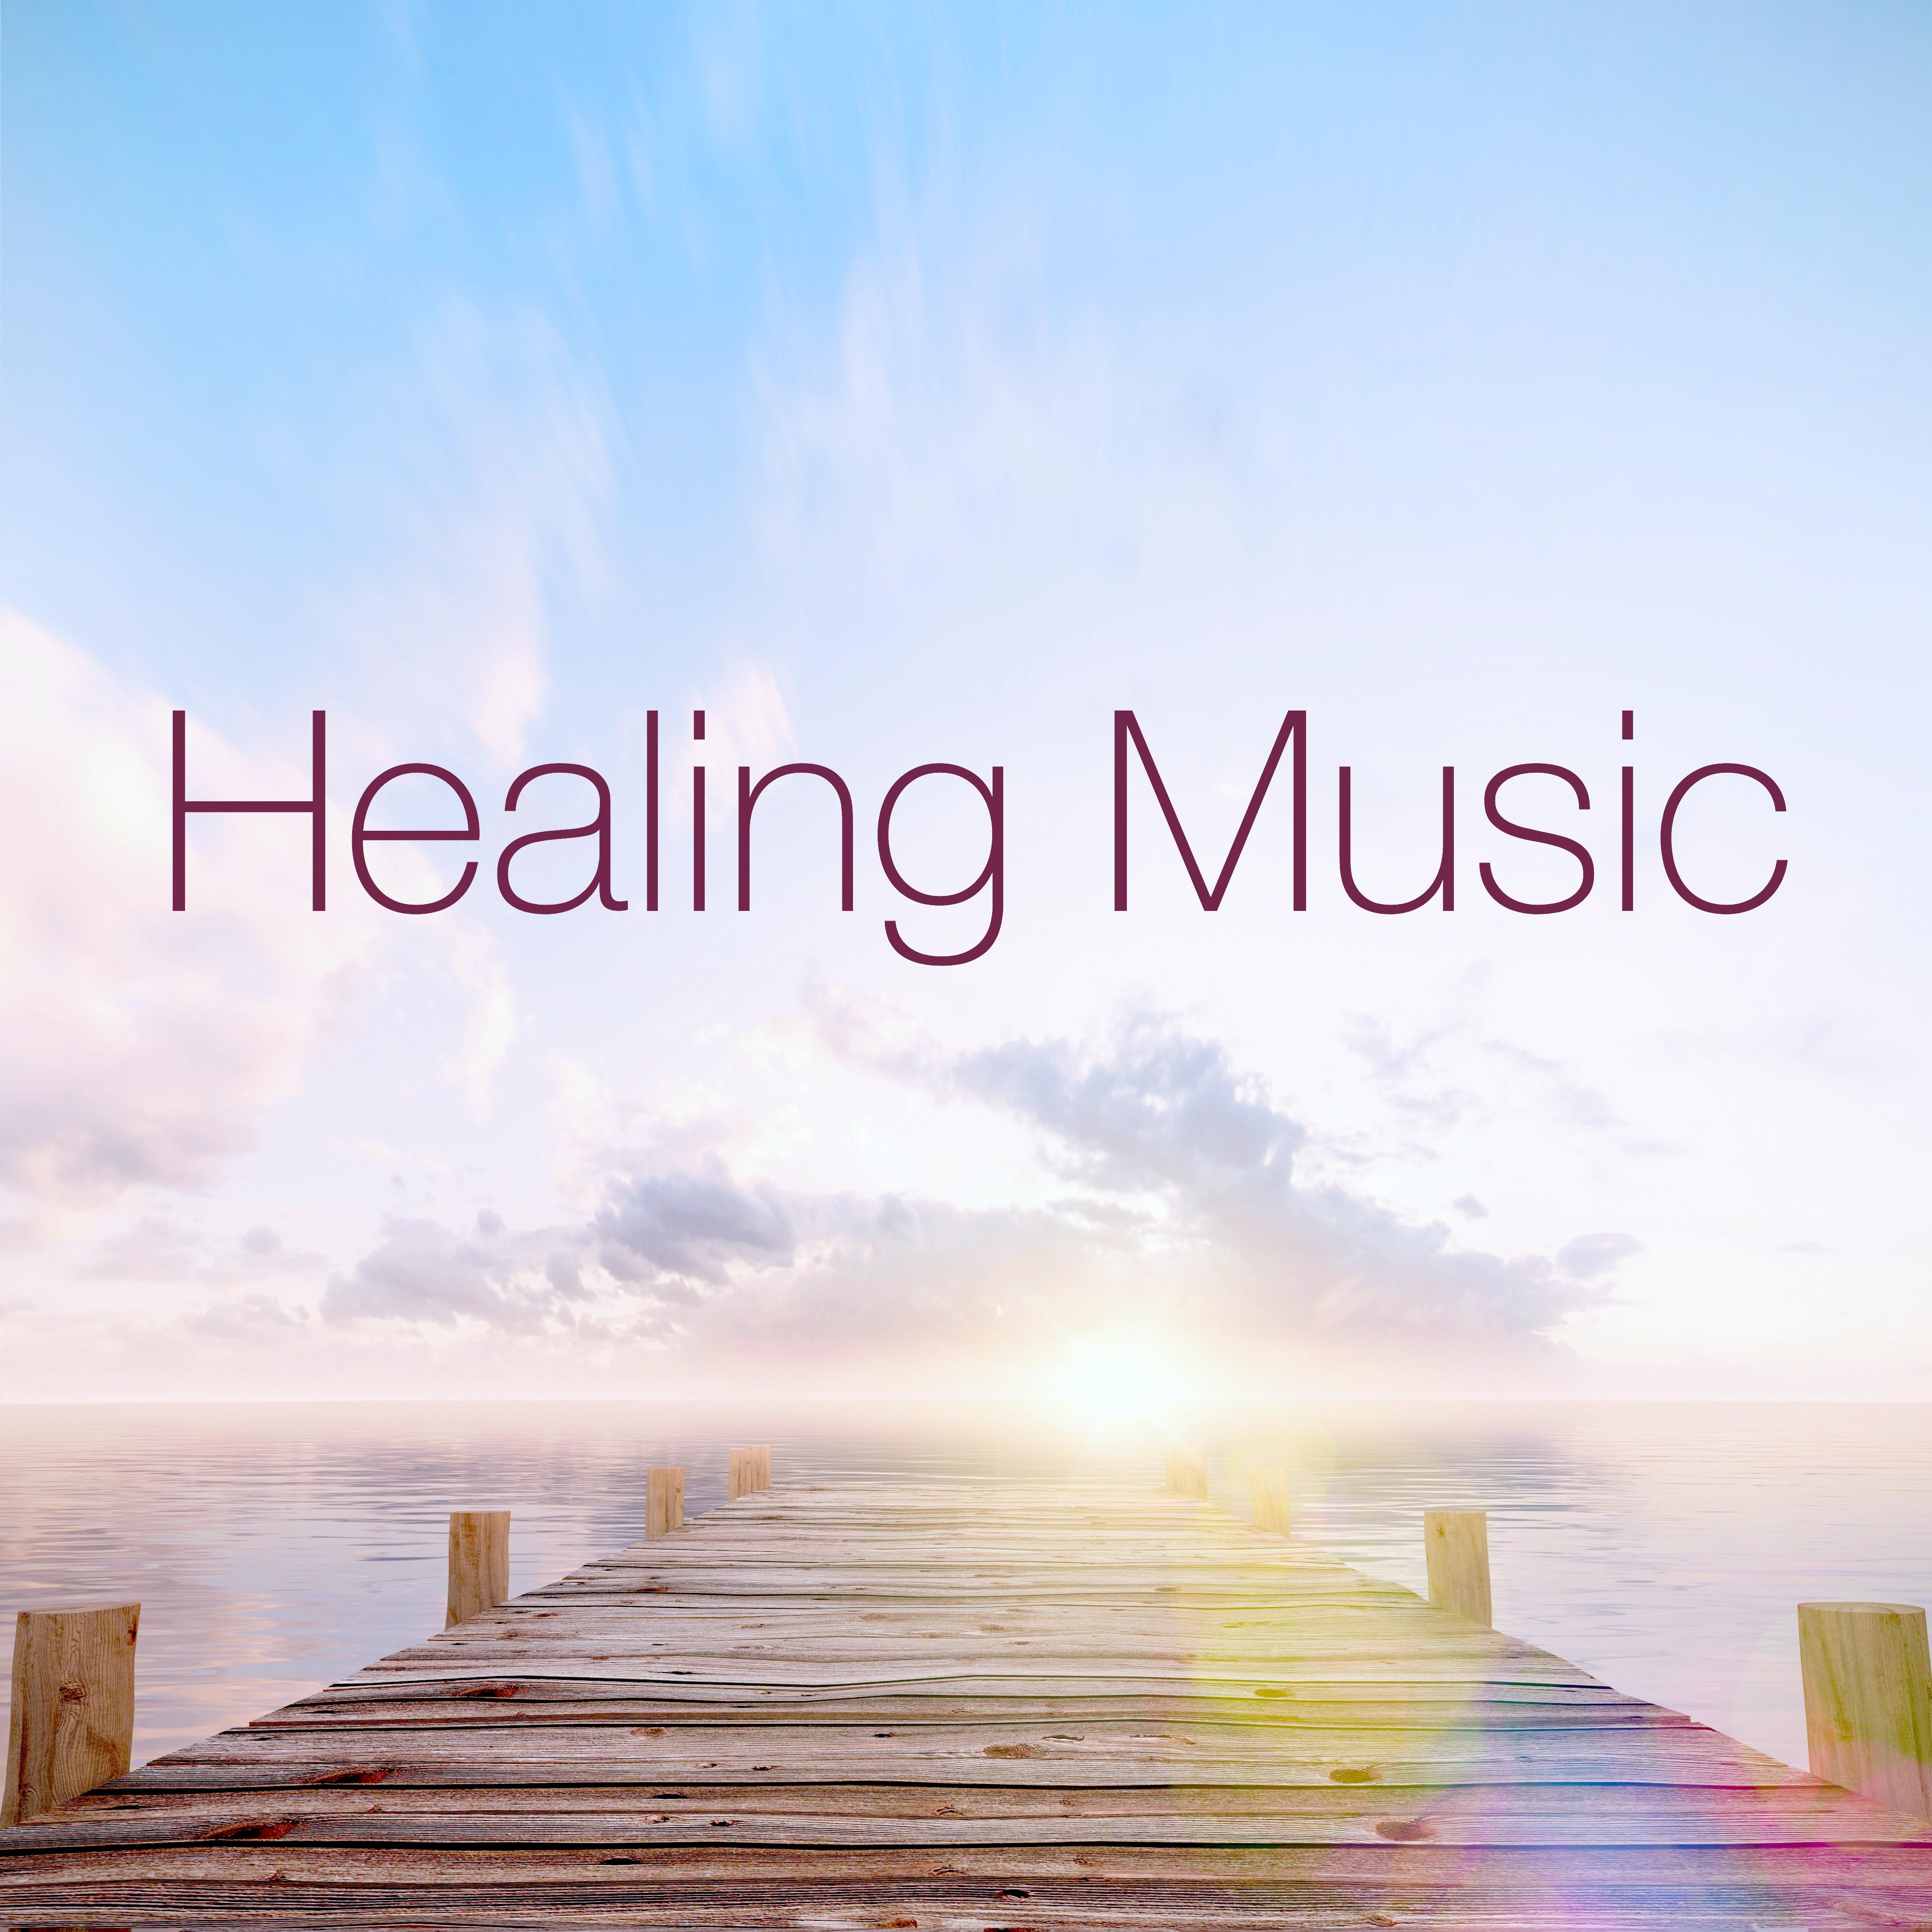 Healing Music - White Noise, Ocean Waves, Water Sounds & Nature Sounds for Stress Relief & Sleep, Music for Meditation, Relaxation, Massage, Sleep, Yoga & Pranayama